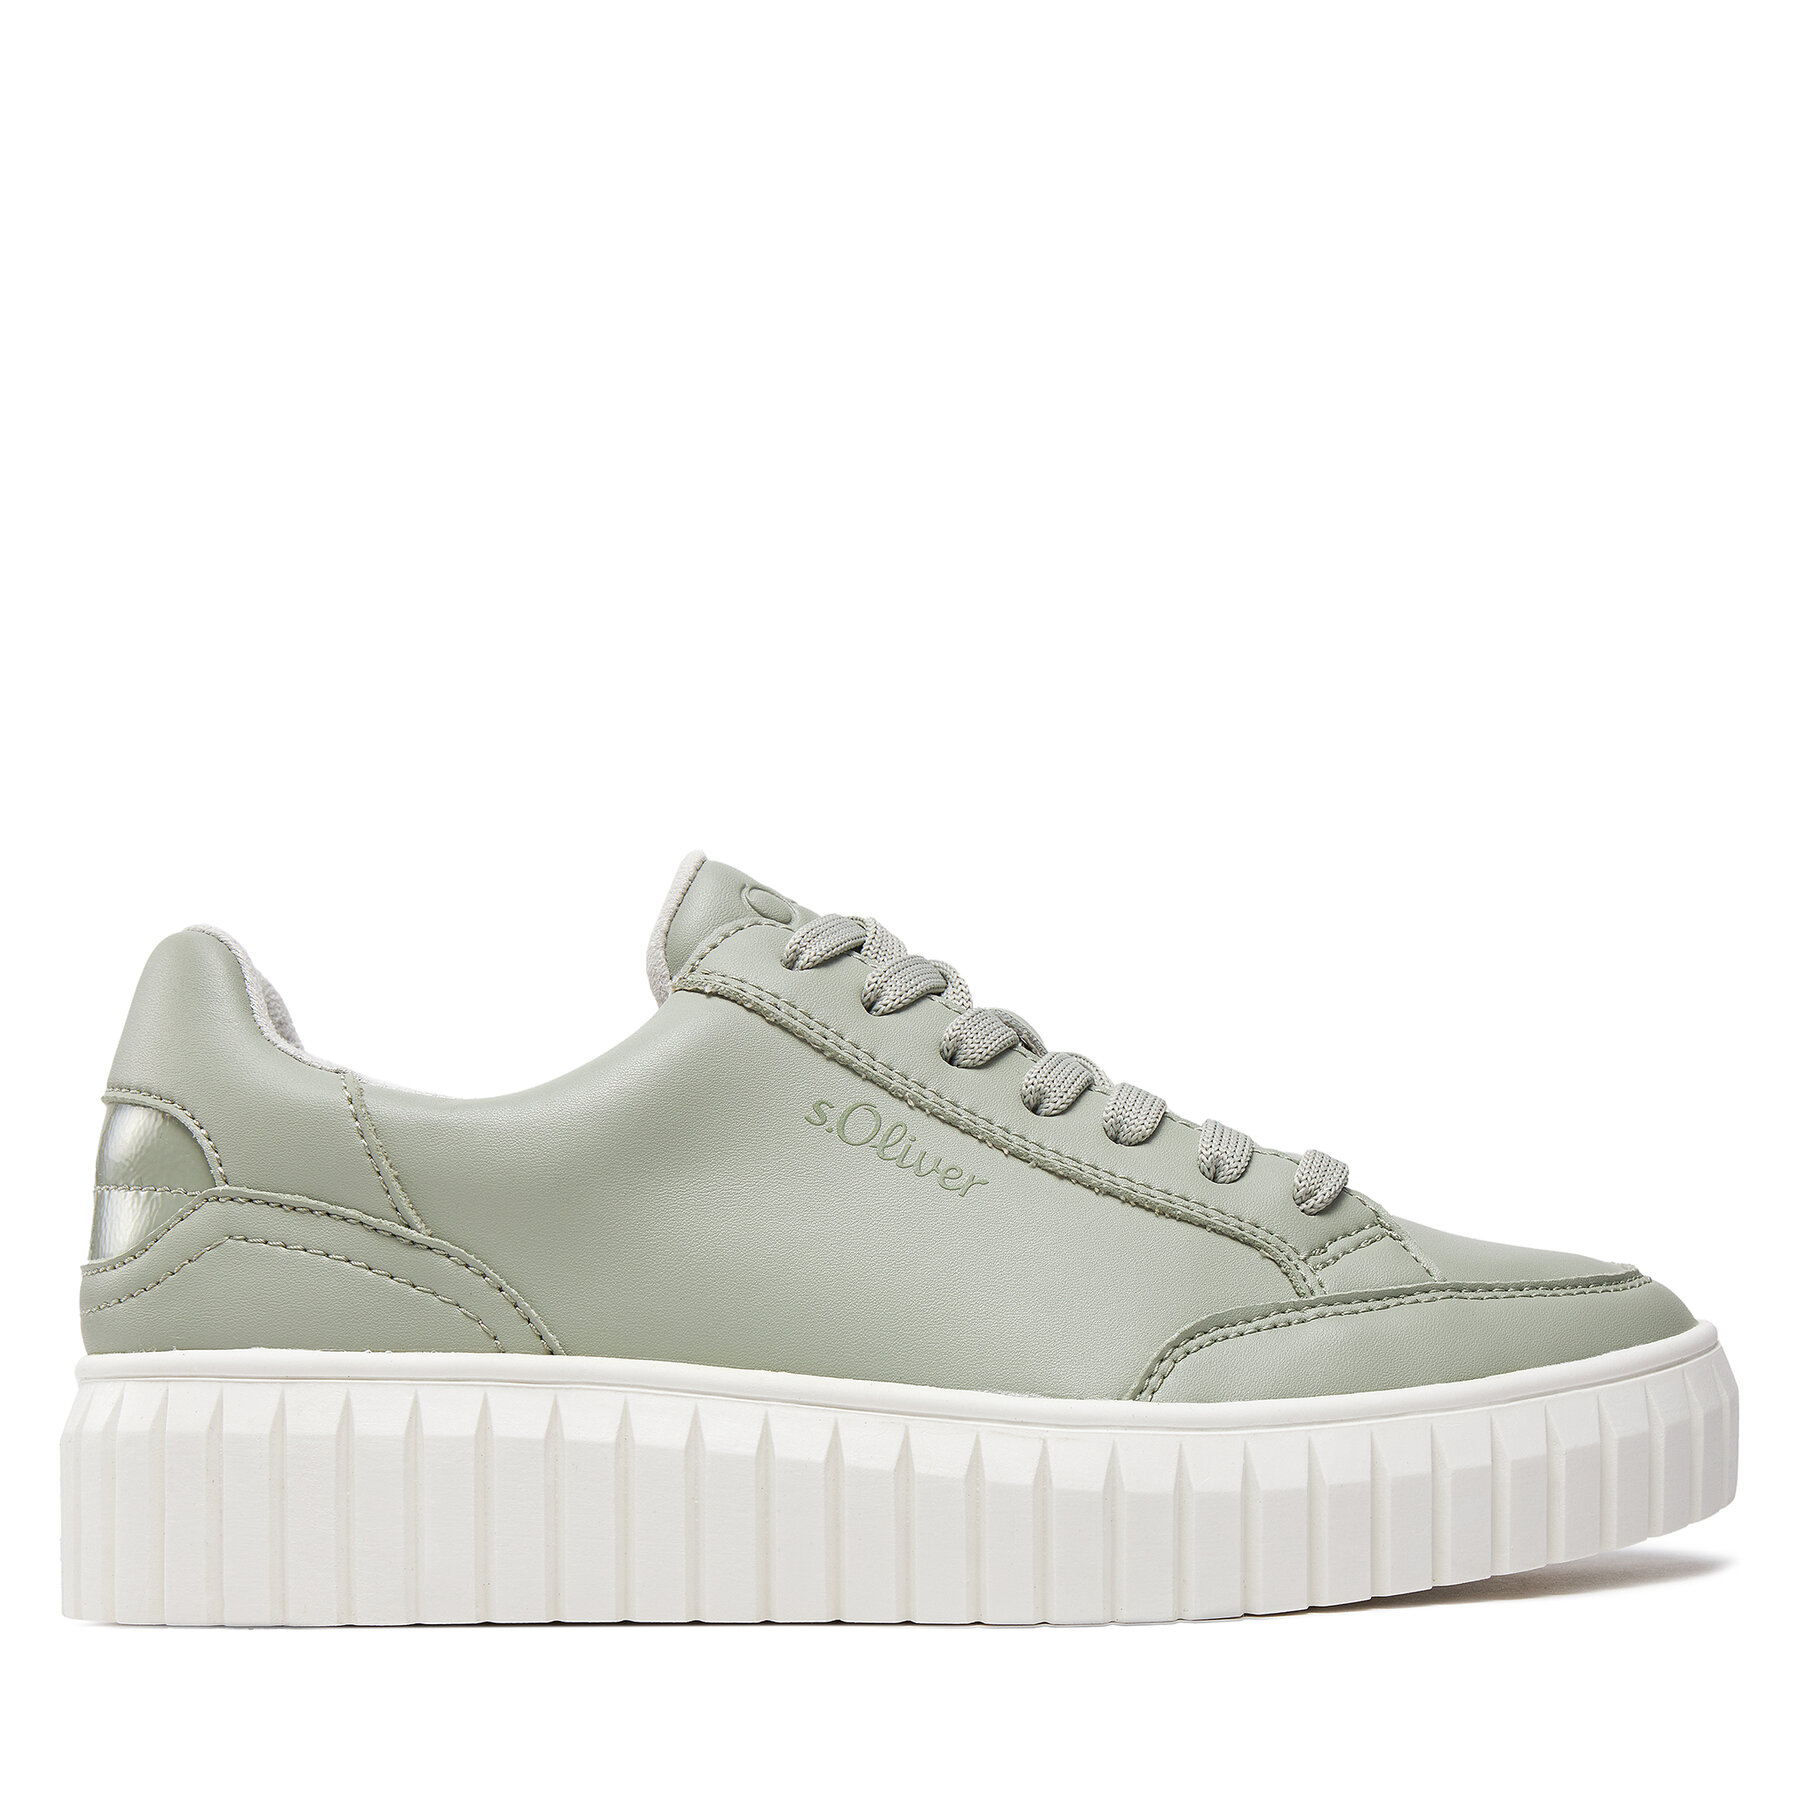 Sneakers s.Oliver 5-23645-42 Mint 703 von s.Oliver